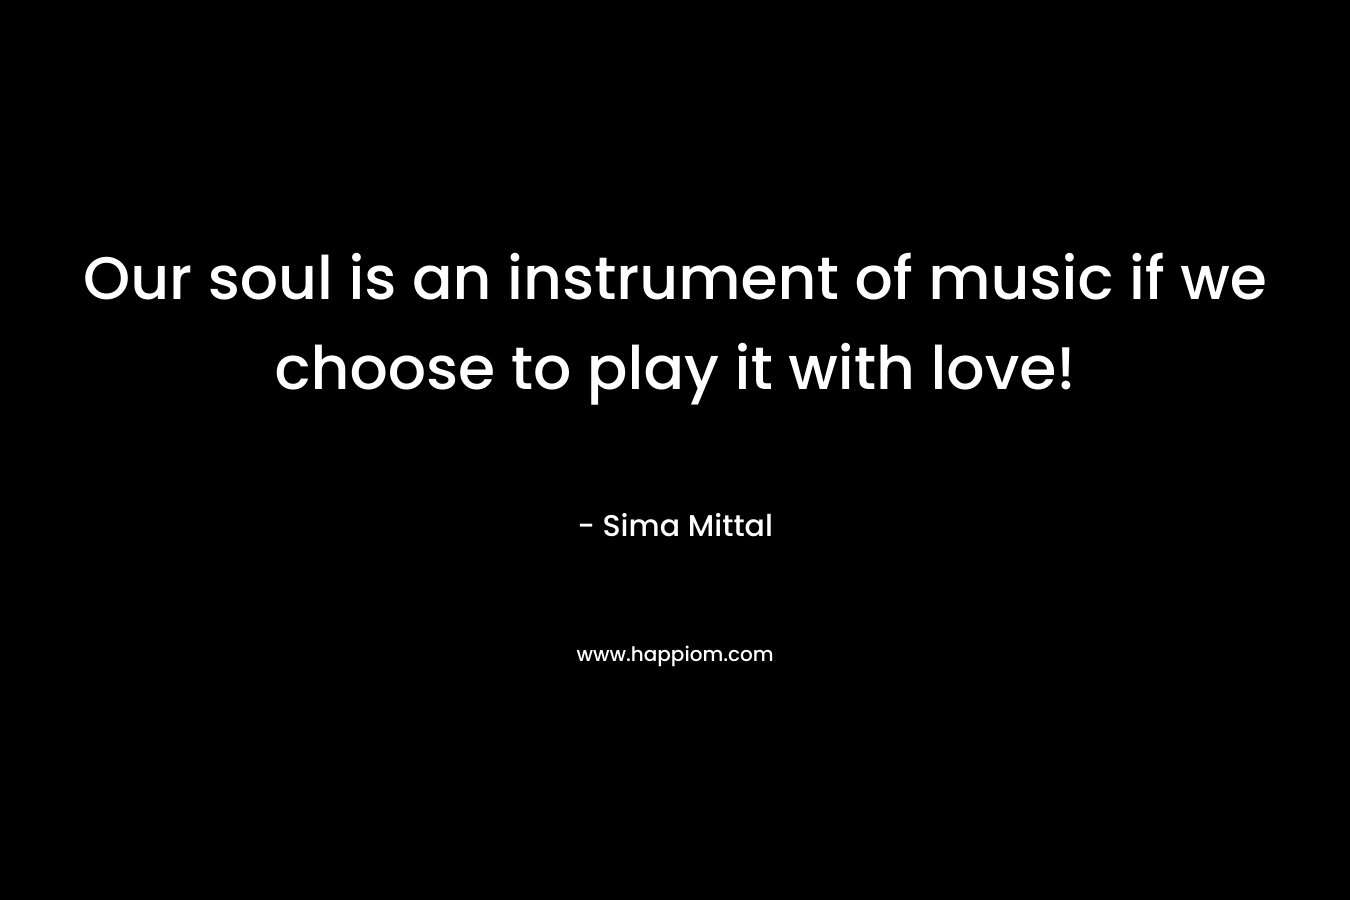 Our soul is an instrument of music if we choose to play it with love!